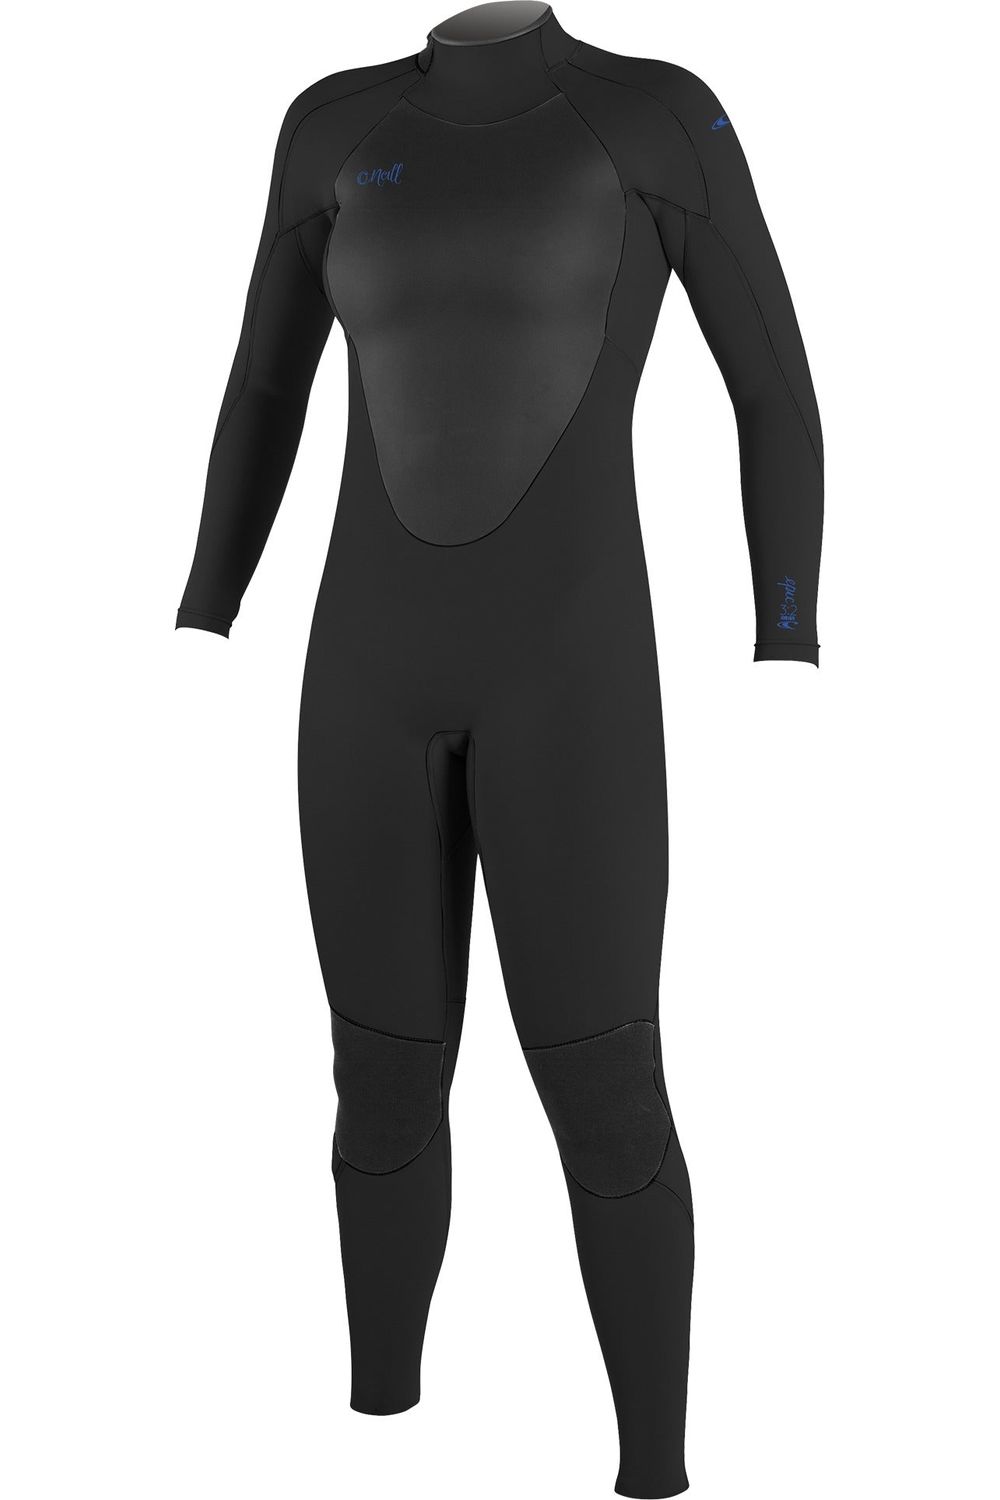 O'Neill Epic Women's Wetsuit 3/2 With Back Zip In Black